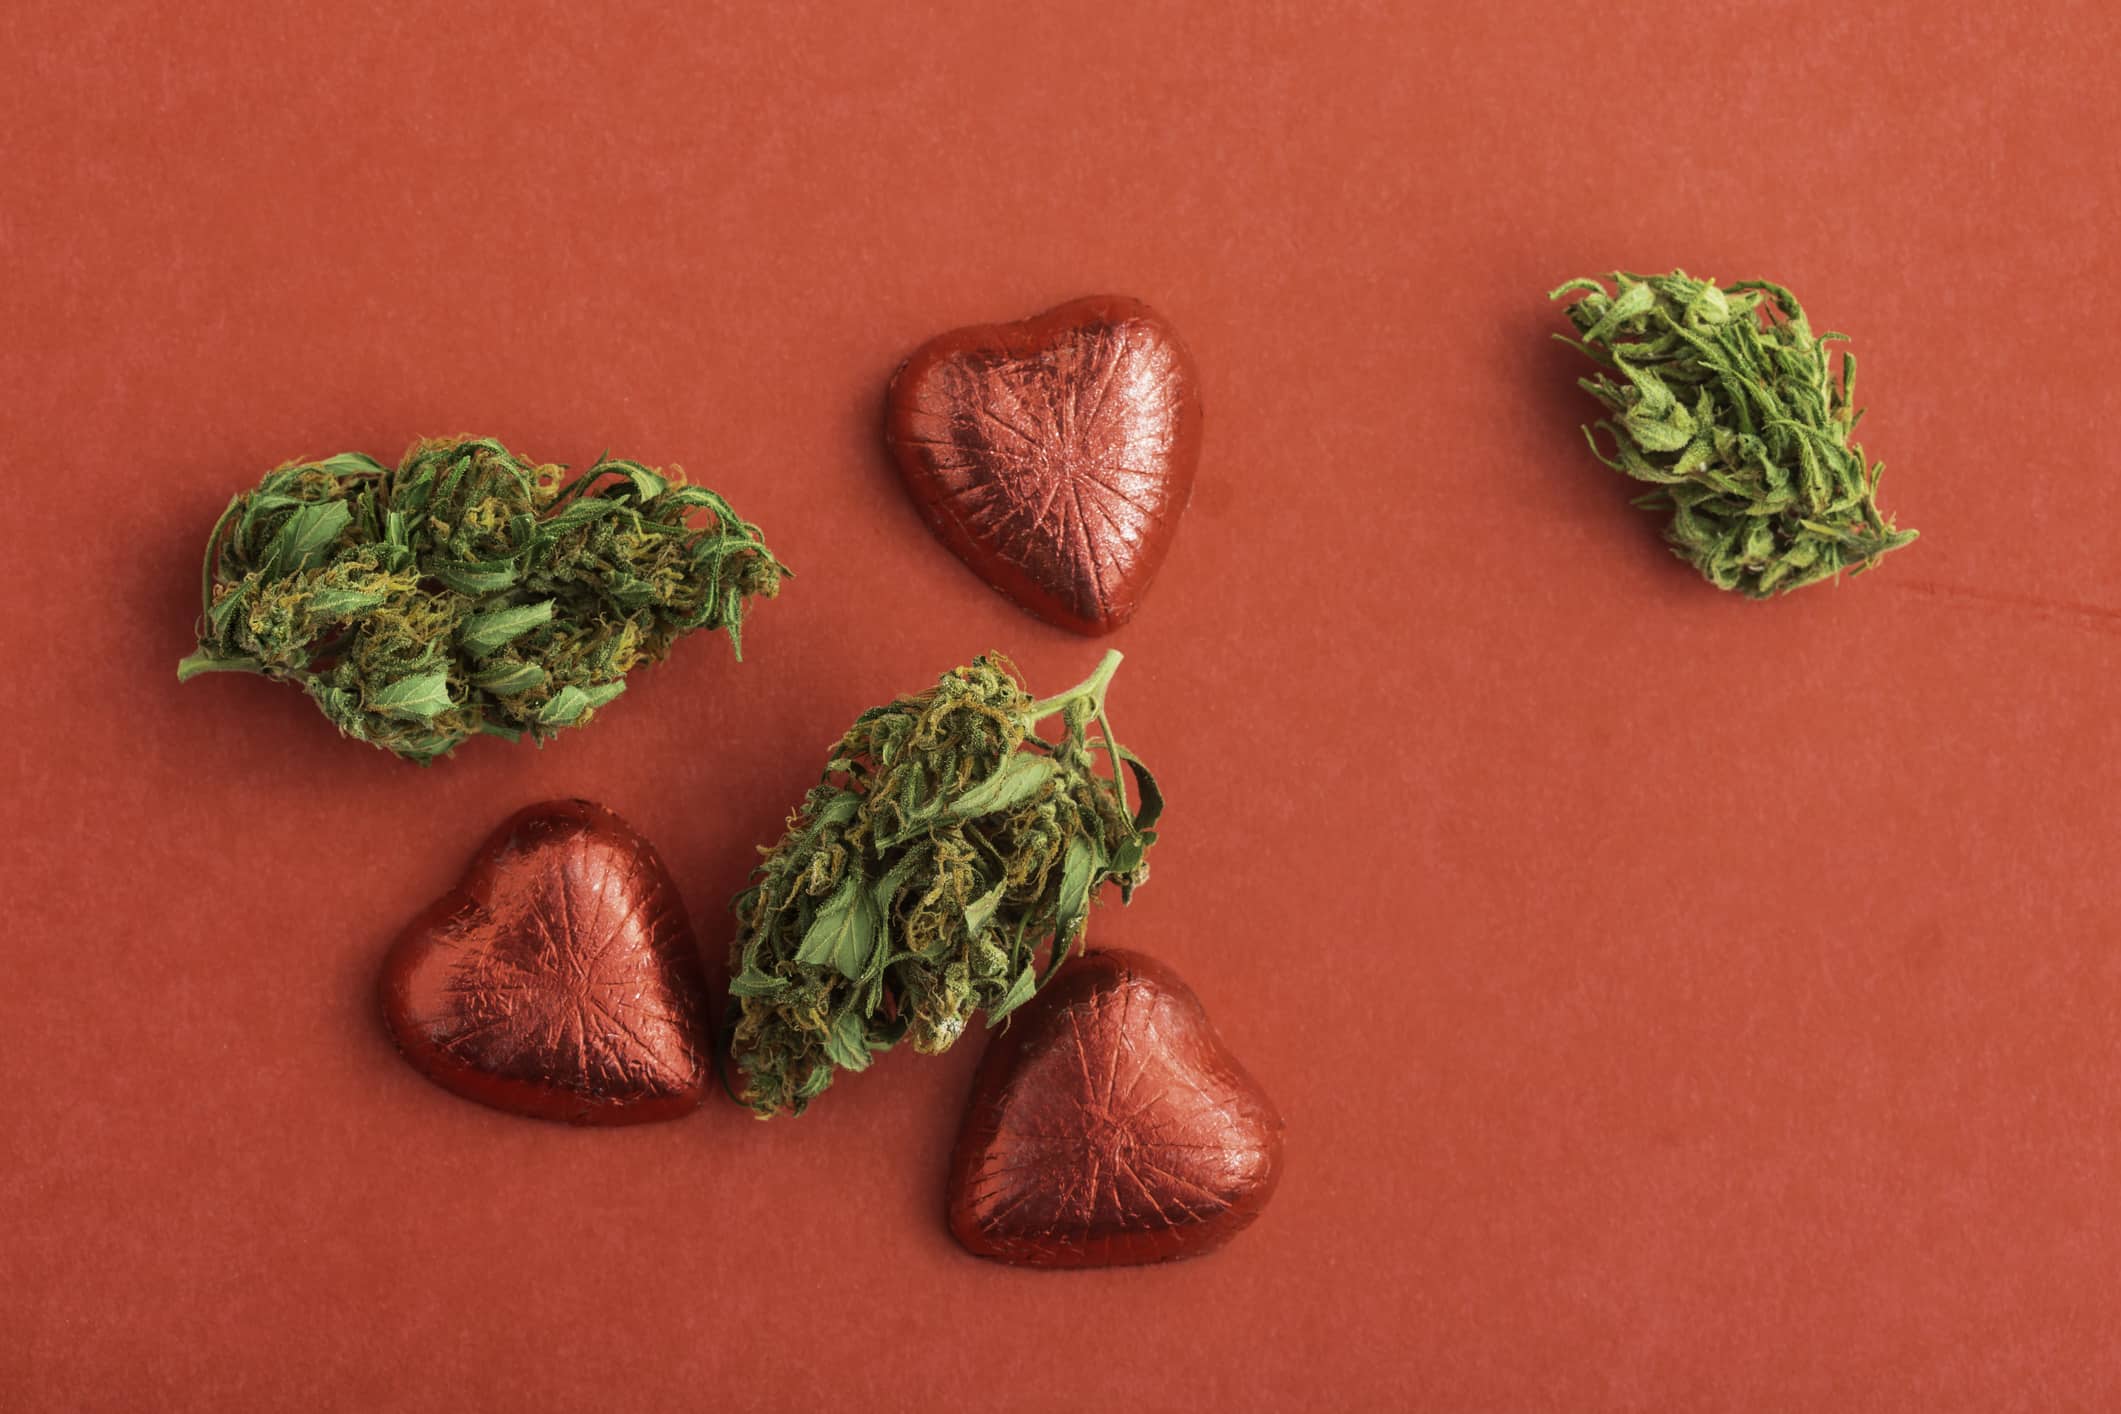 Plan Valentine's Day with the Best Cannabis and Date Spots in Billerica and Littleton, MA